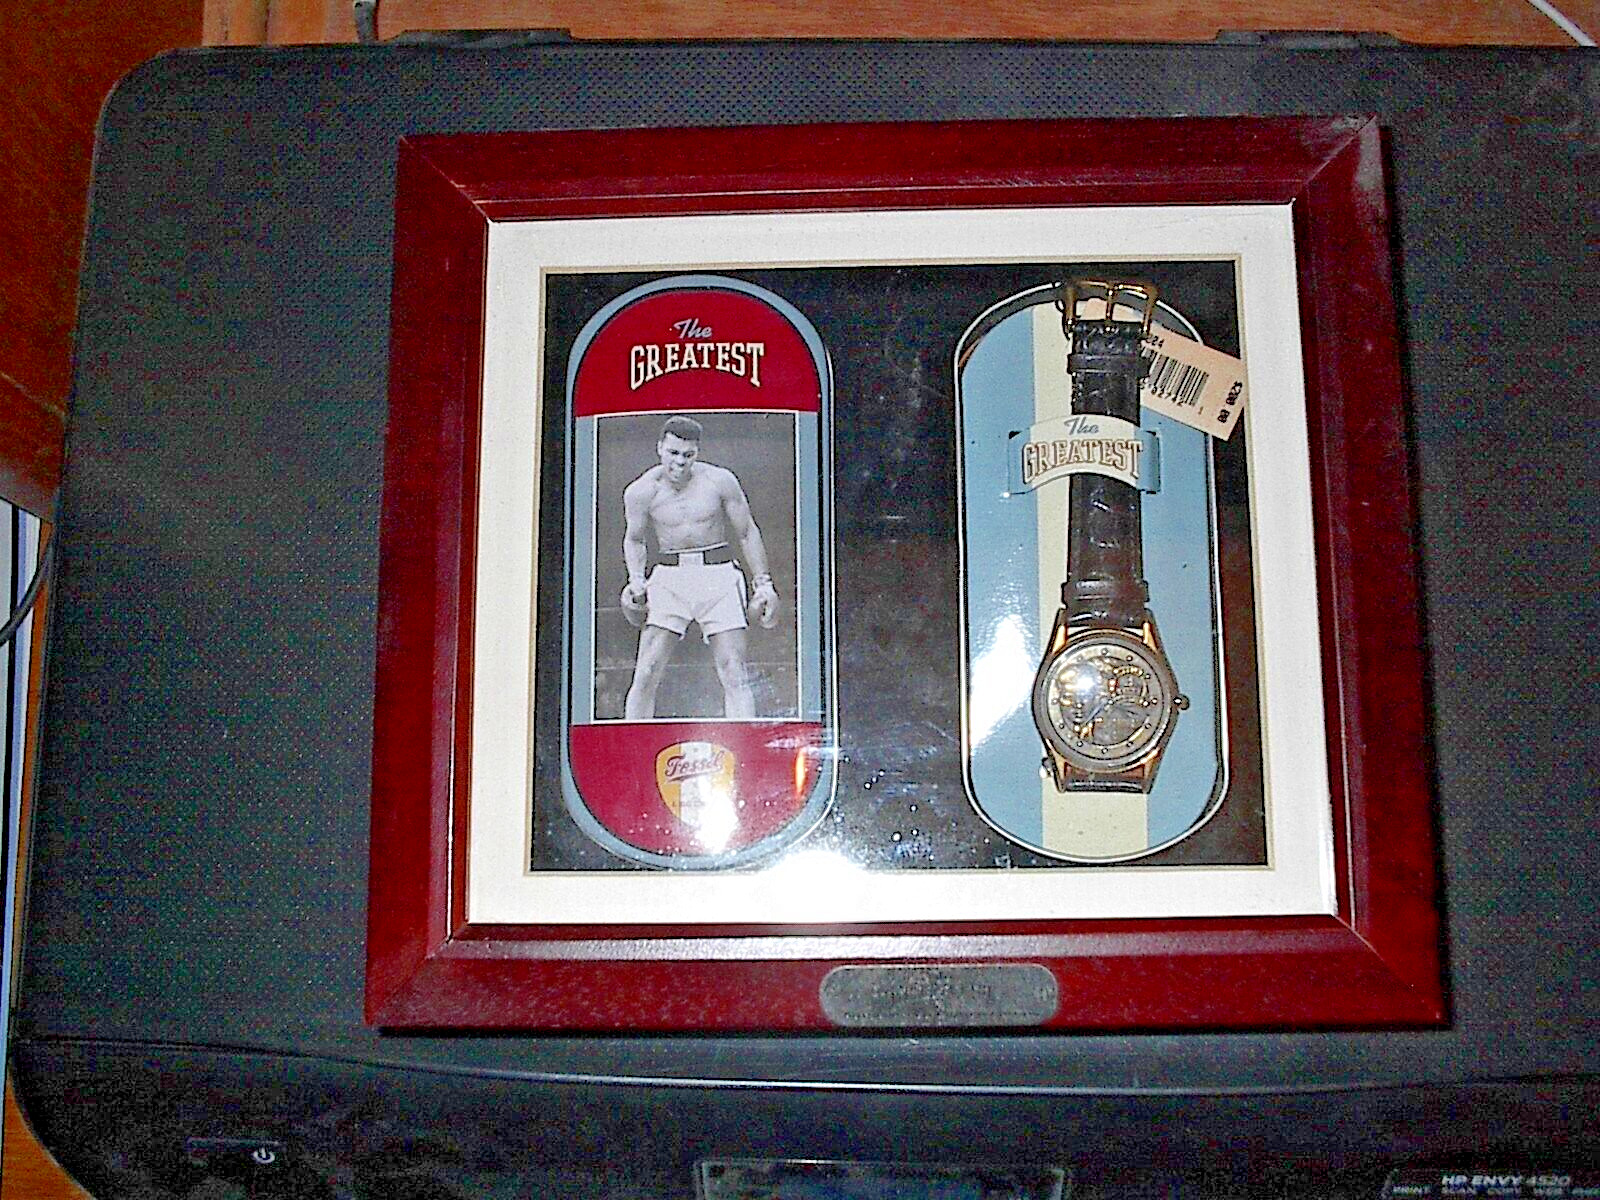 1993 FOSSIL MUHAMMAD ALI THE GREATEST WATCH NEW IN DISPLAY CASE (4323/7500)